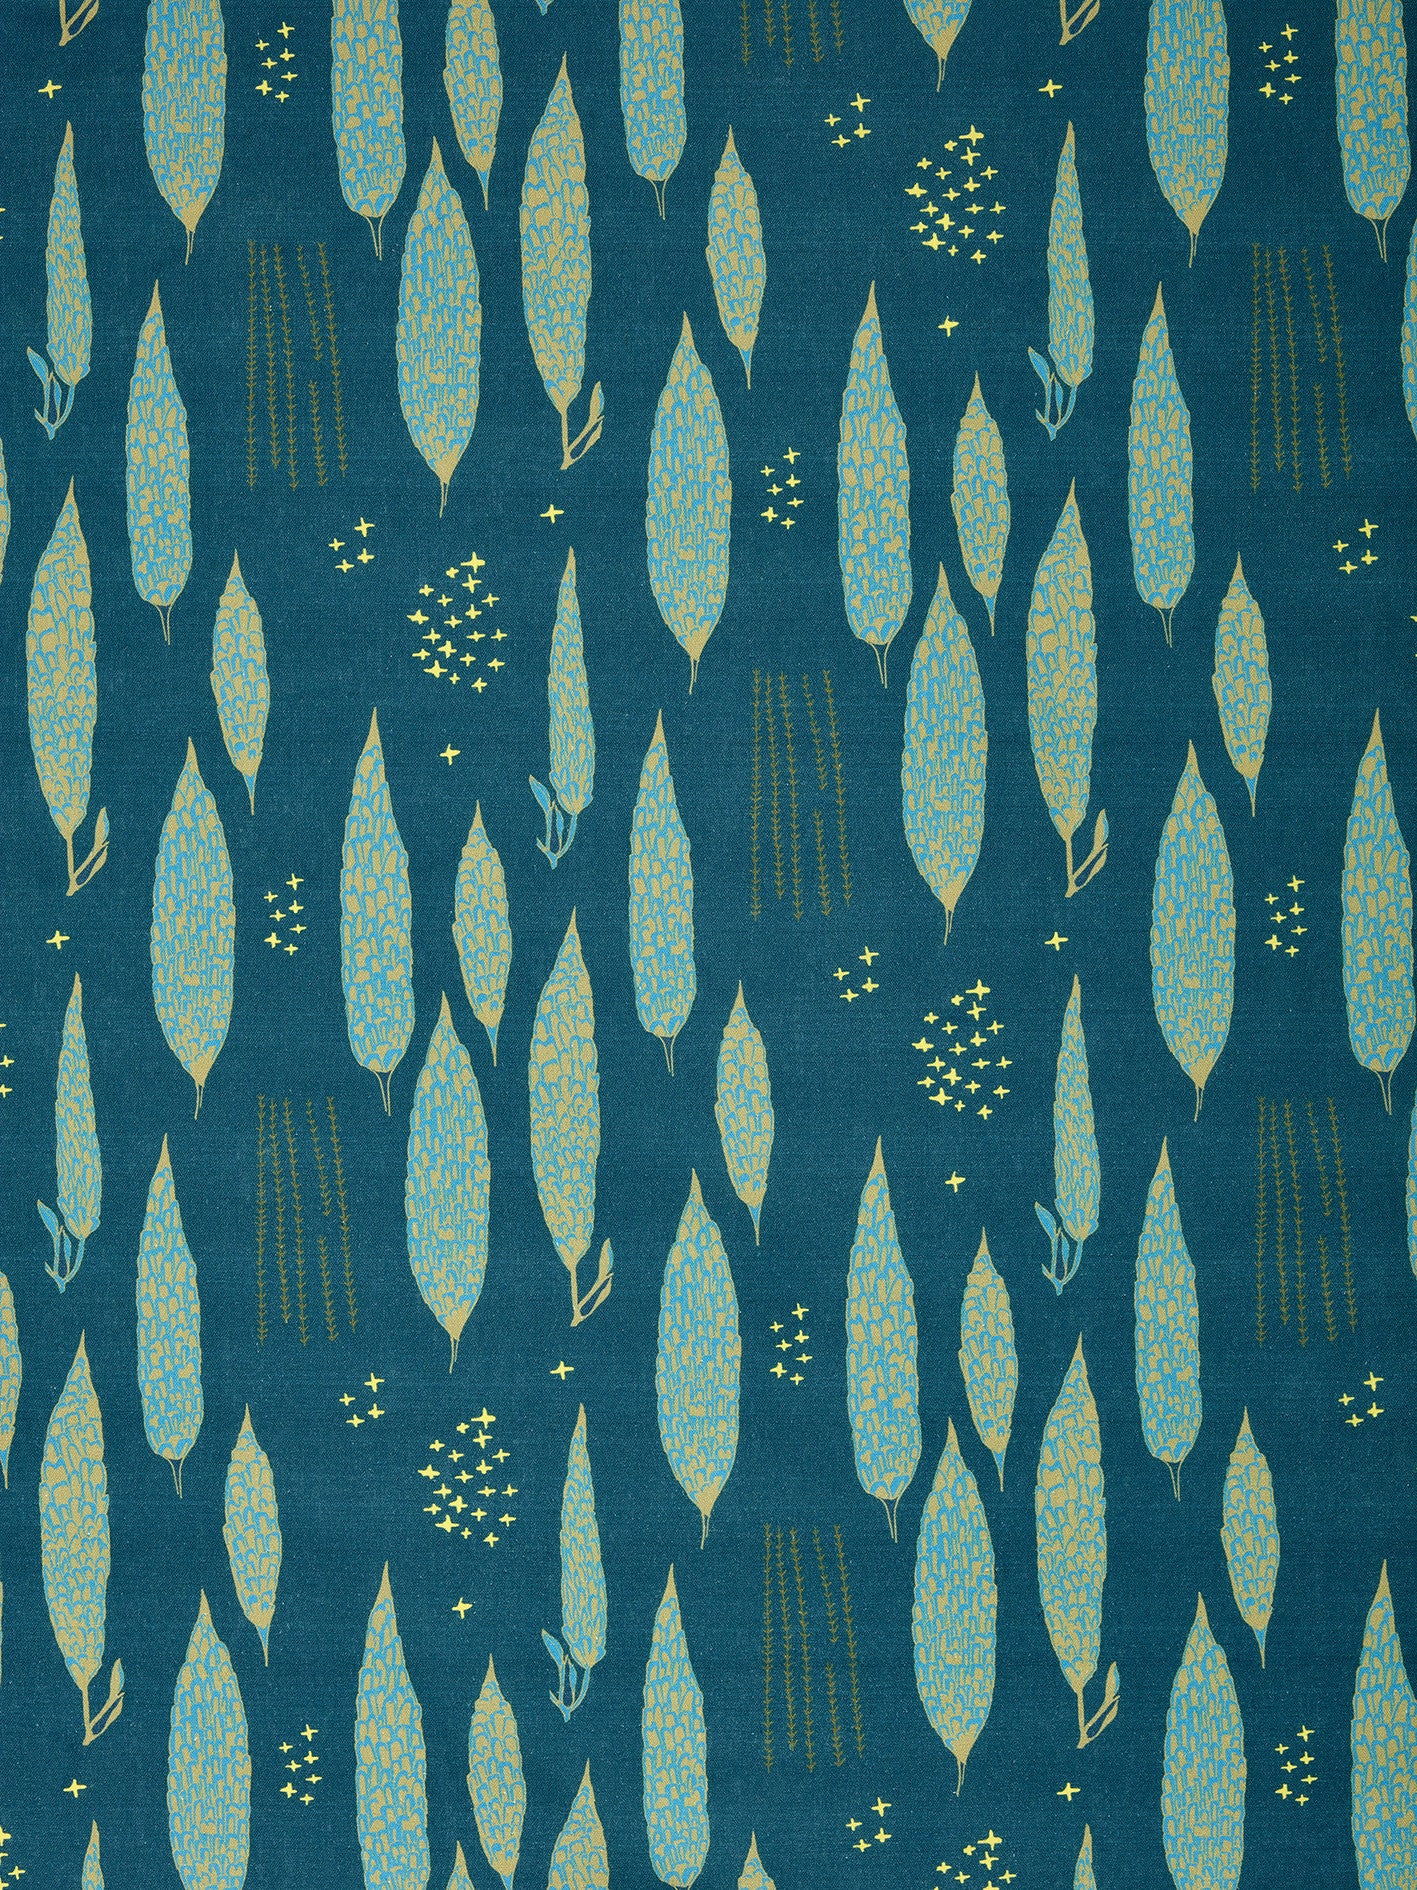 Graphic Rosemary Sprig Pattern Printed Linen Cotton Canvas Home Decor Fabric by meter or yard in Dark Petrol Blue, Antique Moss Green and Turquoise curtains, blinds or upholstery ships from Canada (USA)